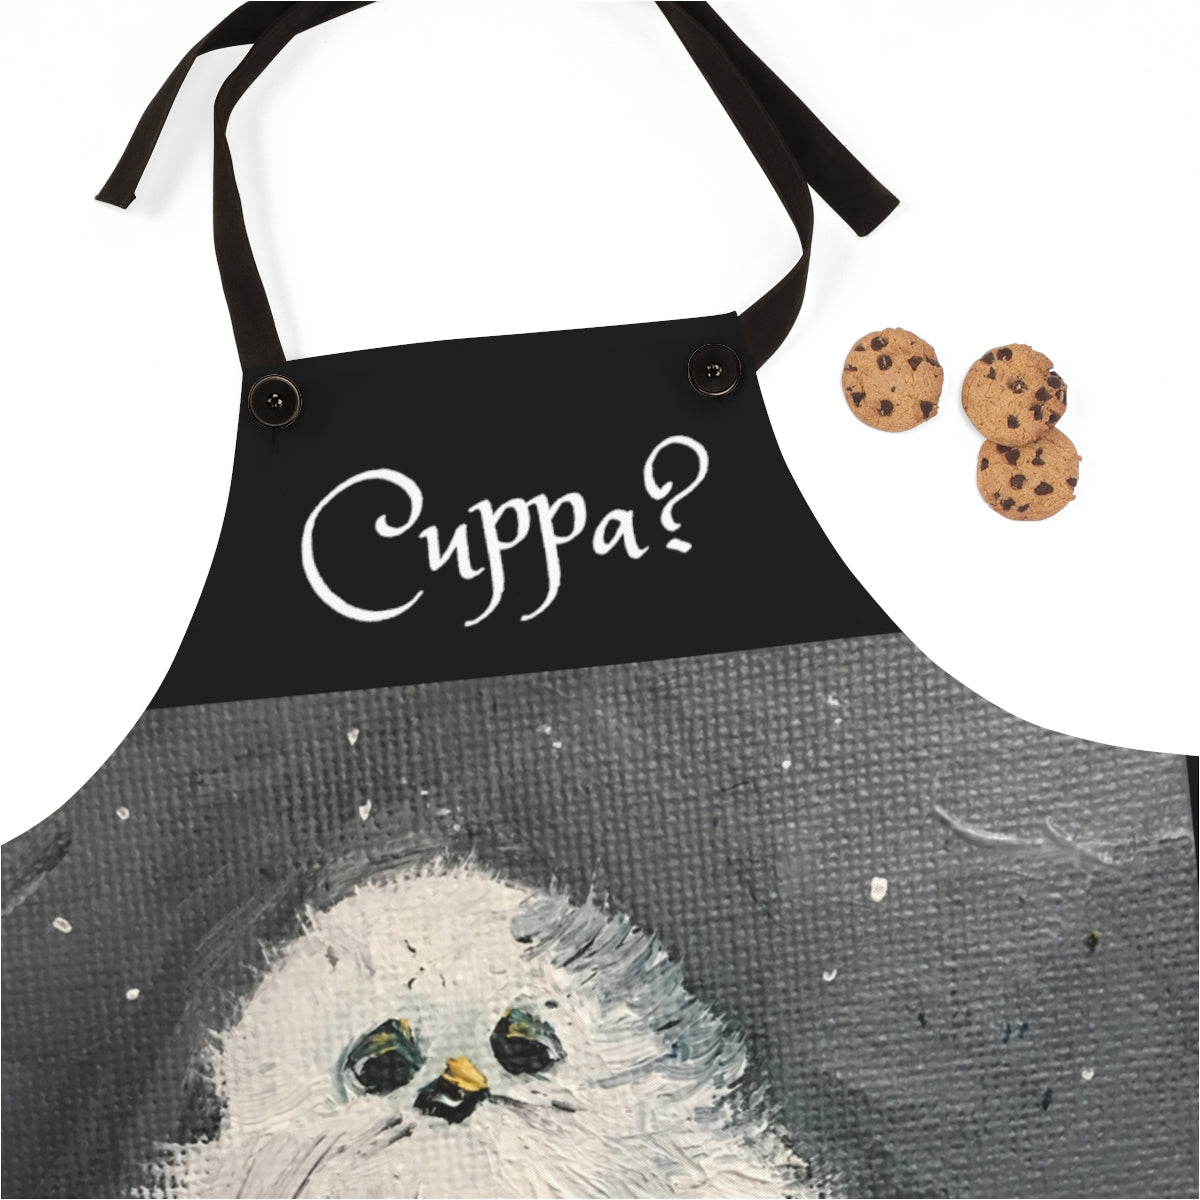 Cuppa? English UK phrase saying on a Black Kitchen Apron  with   Baby Tit  Bird in the Snow